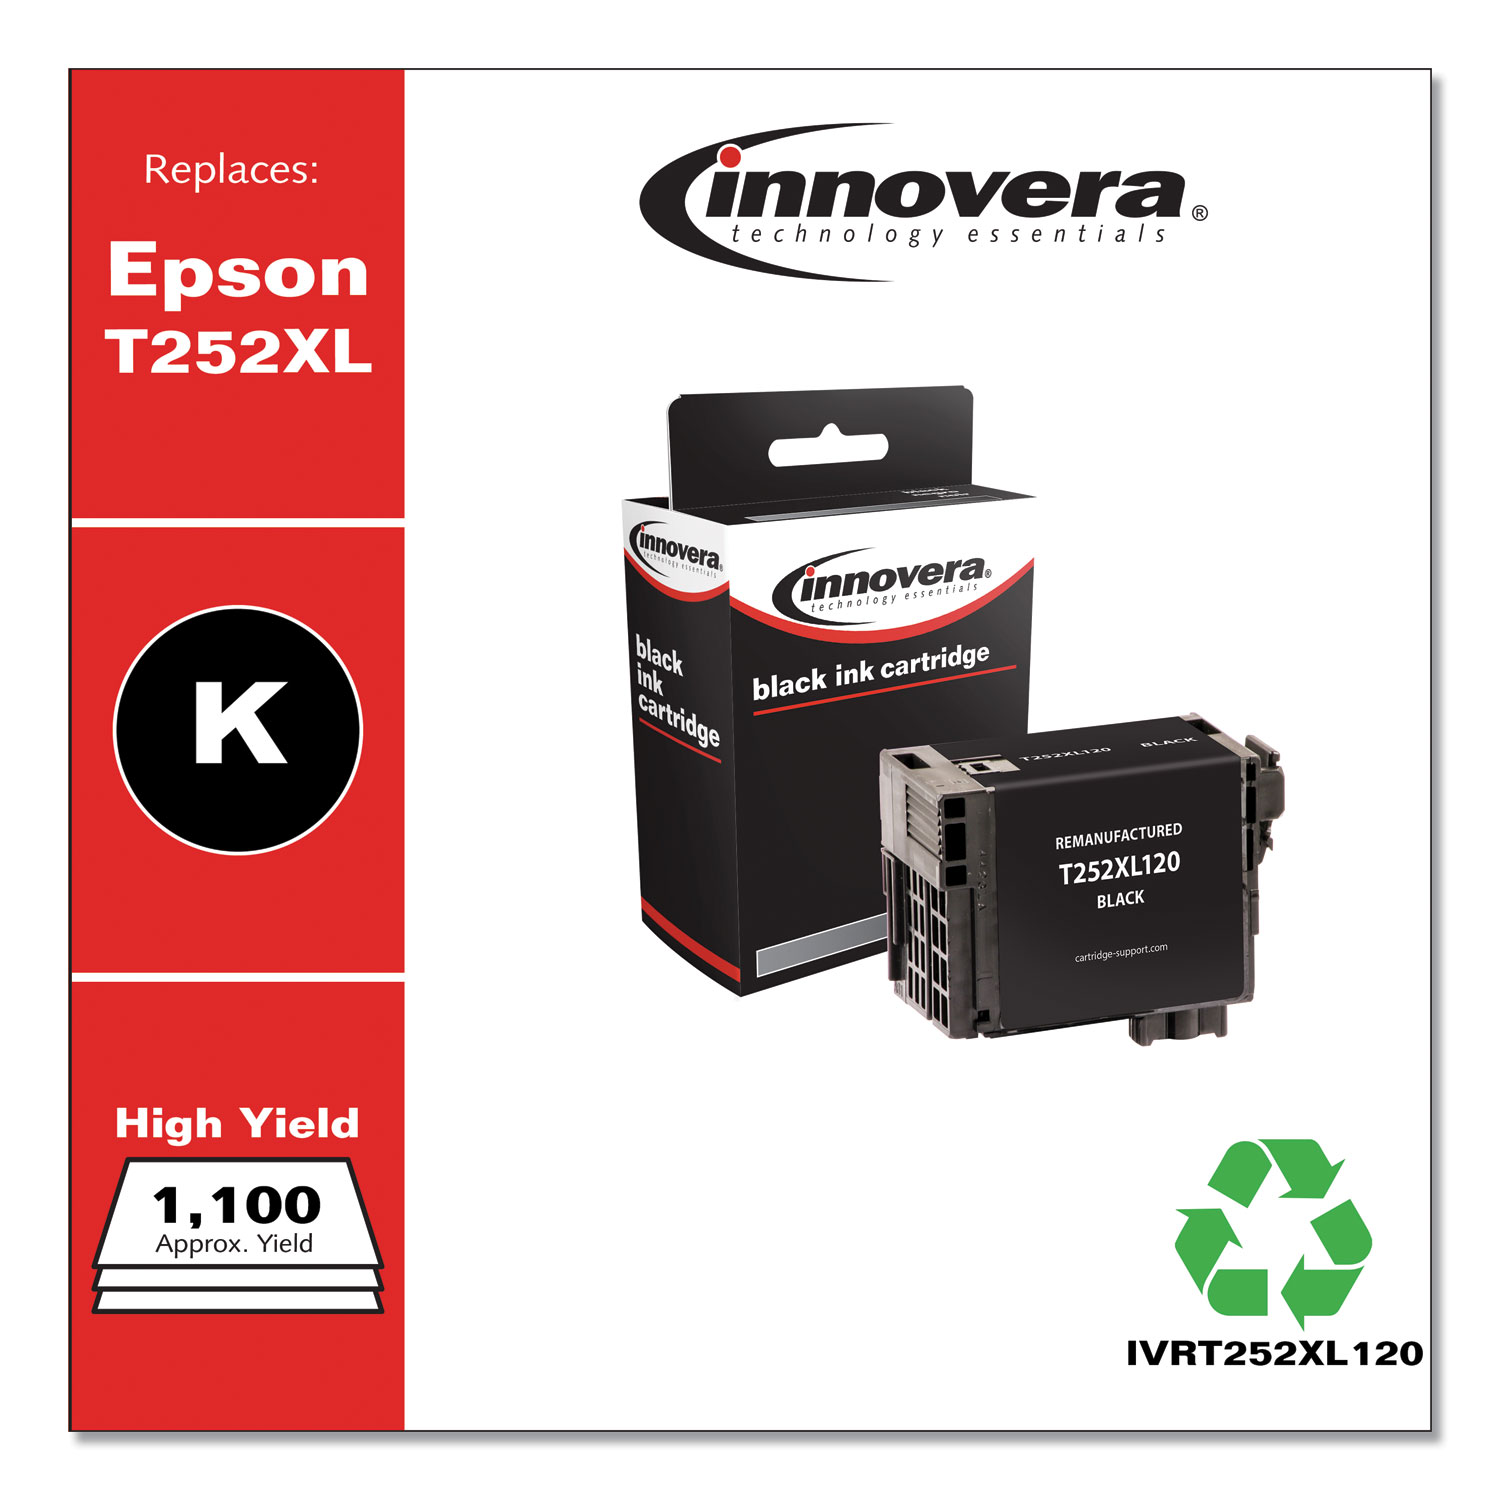  Innovera IVRT252XL120 Remanufactured Black High-Yield Ink, Replacement for Epson T252XL (T252XL120), 1,100 Page-Yield (IVRT252XL120) 